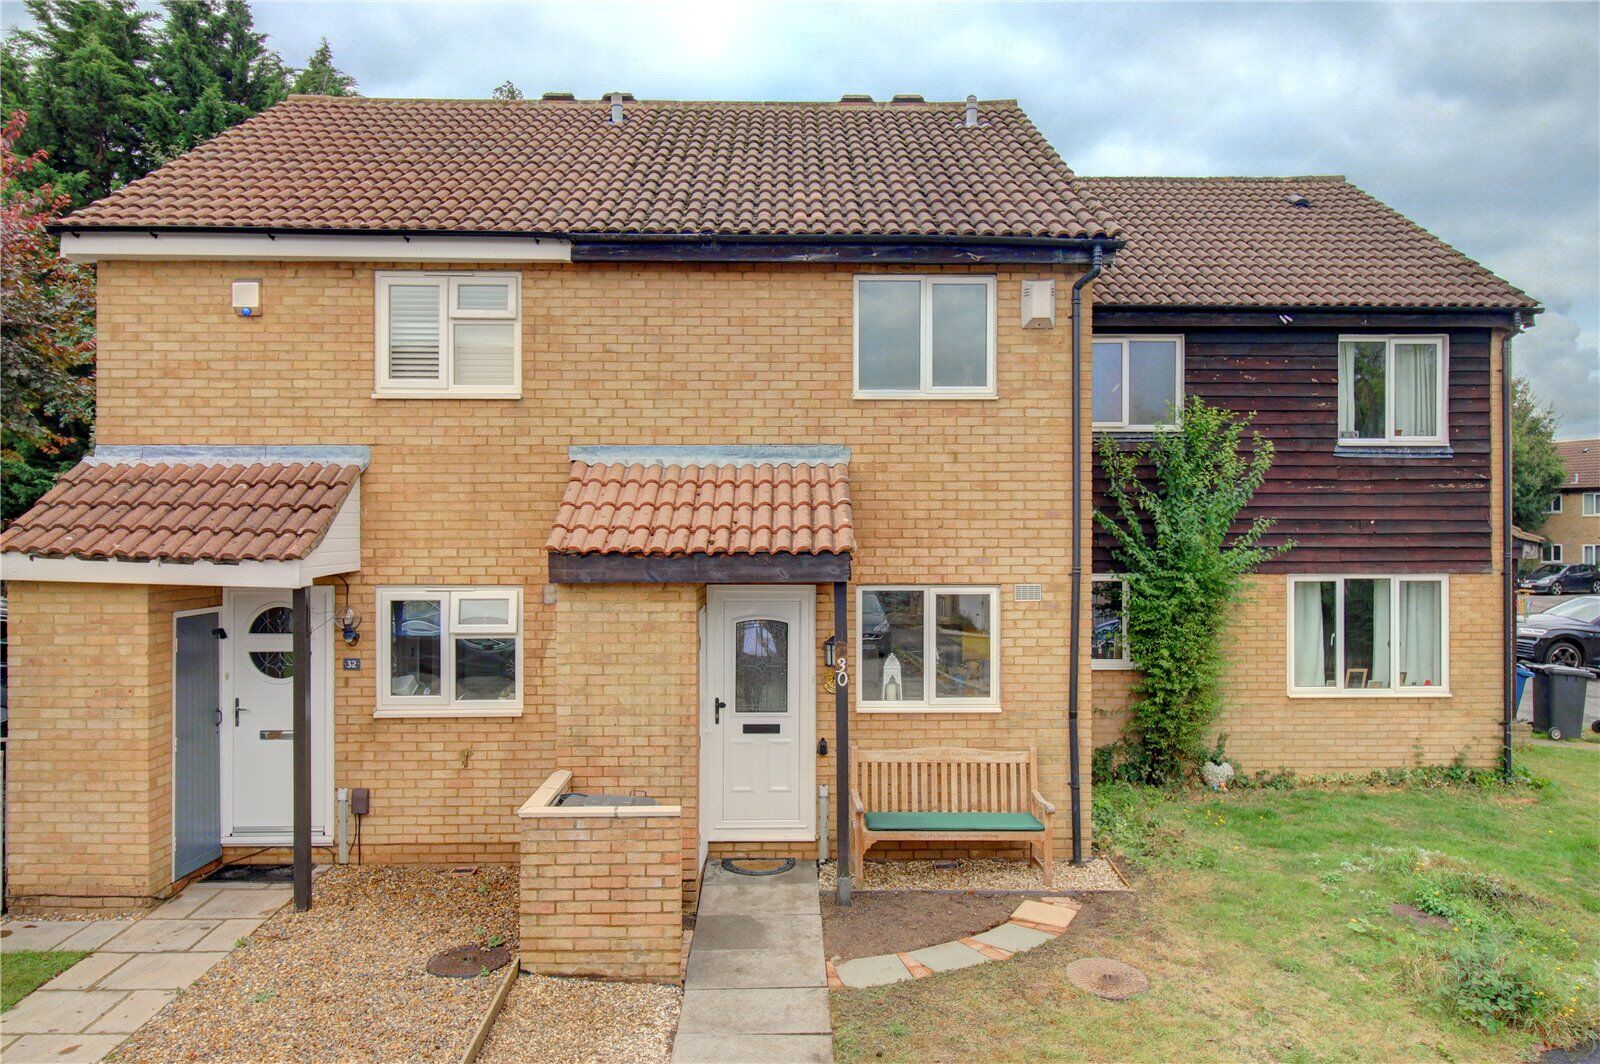 2 bedroom mid terraced house for sale Lansdowne Way, High Wycombe, HP11, main image